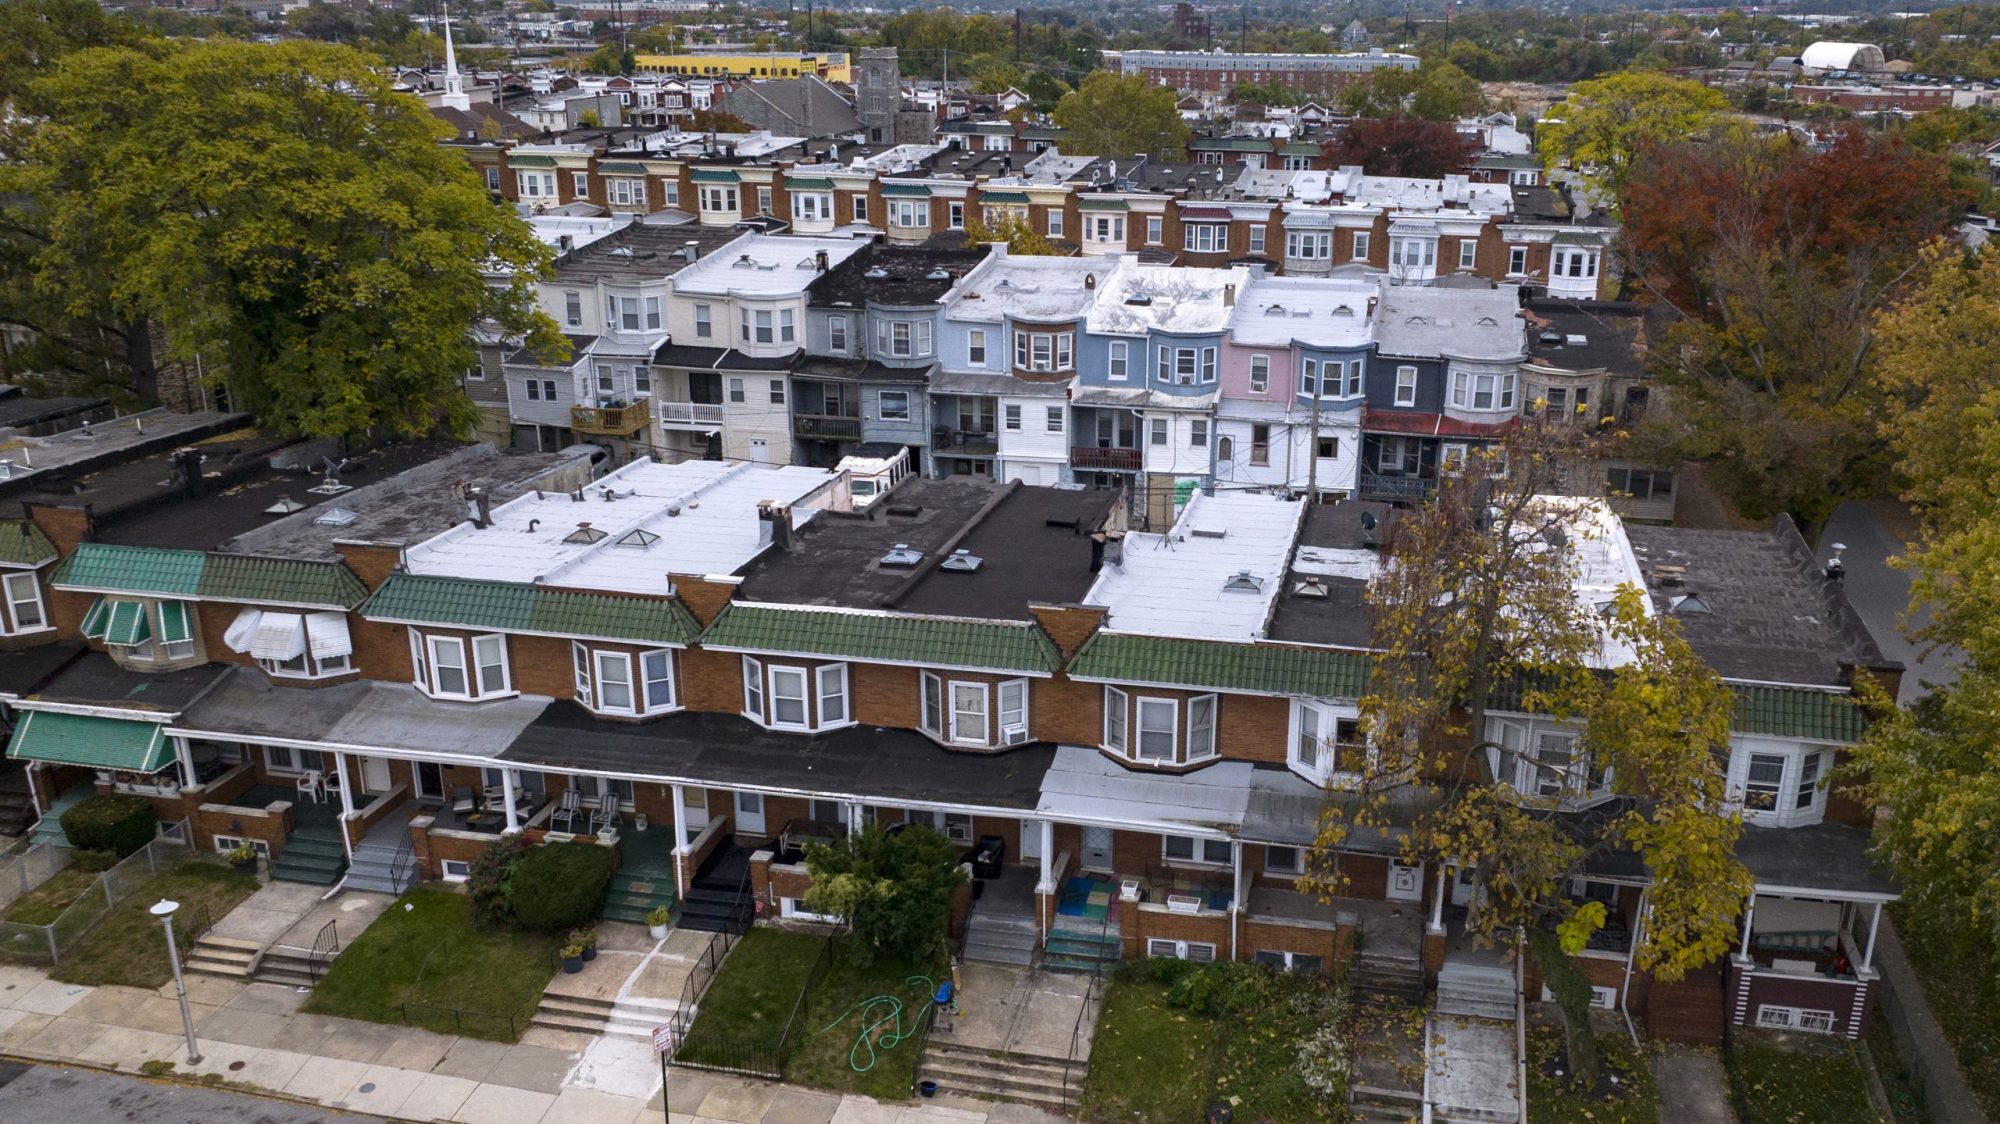 Aerial view of rows of brightly covered row houses of Northern Baltimore. Photo by: Visions of America/Joseph Sohm/Universal Images Group via Getty Images.